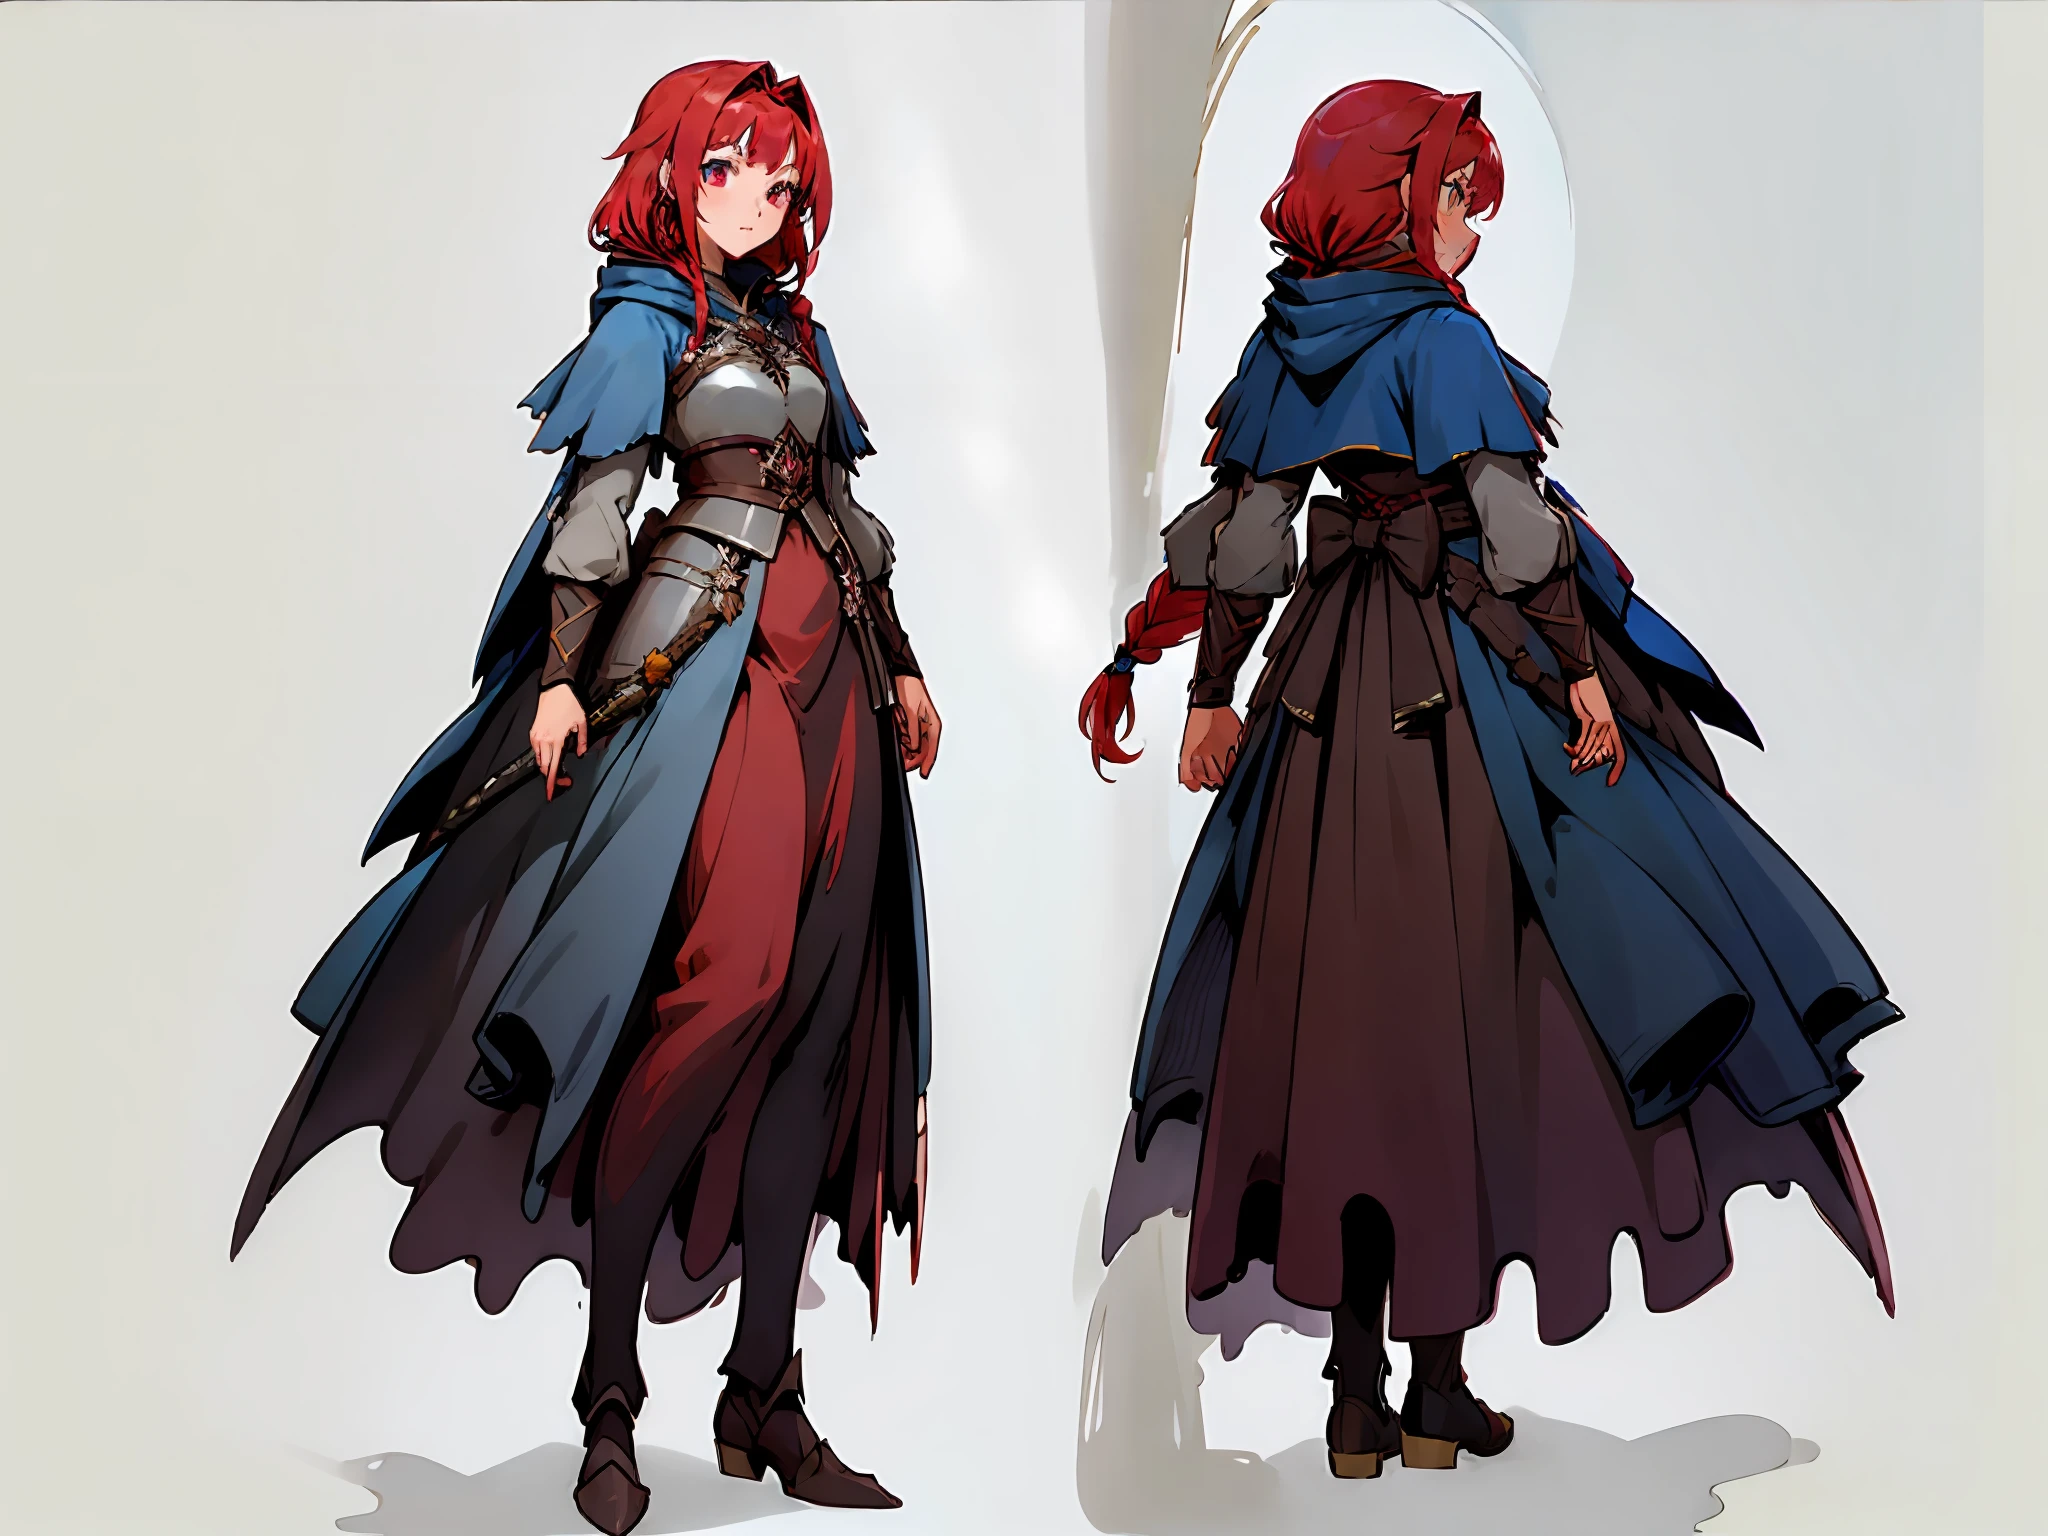 ((masterpiece)),(((best quality))),((character design sheet,same character,front,side,back)),illustration,1 girl,long braid, red hair,beautiful eyes,environment Scene change, pose too, female princess, Knight Armor and sword, glowing hood, poncho with colorful adornments, charturnbetalora, (simple background, white background: 1.3)